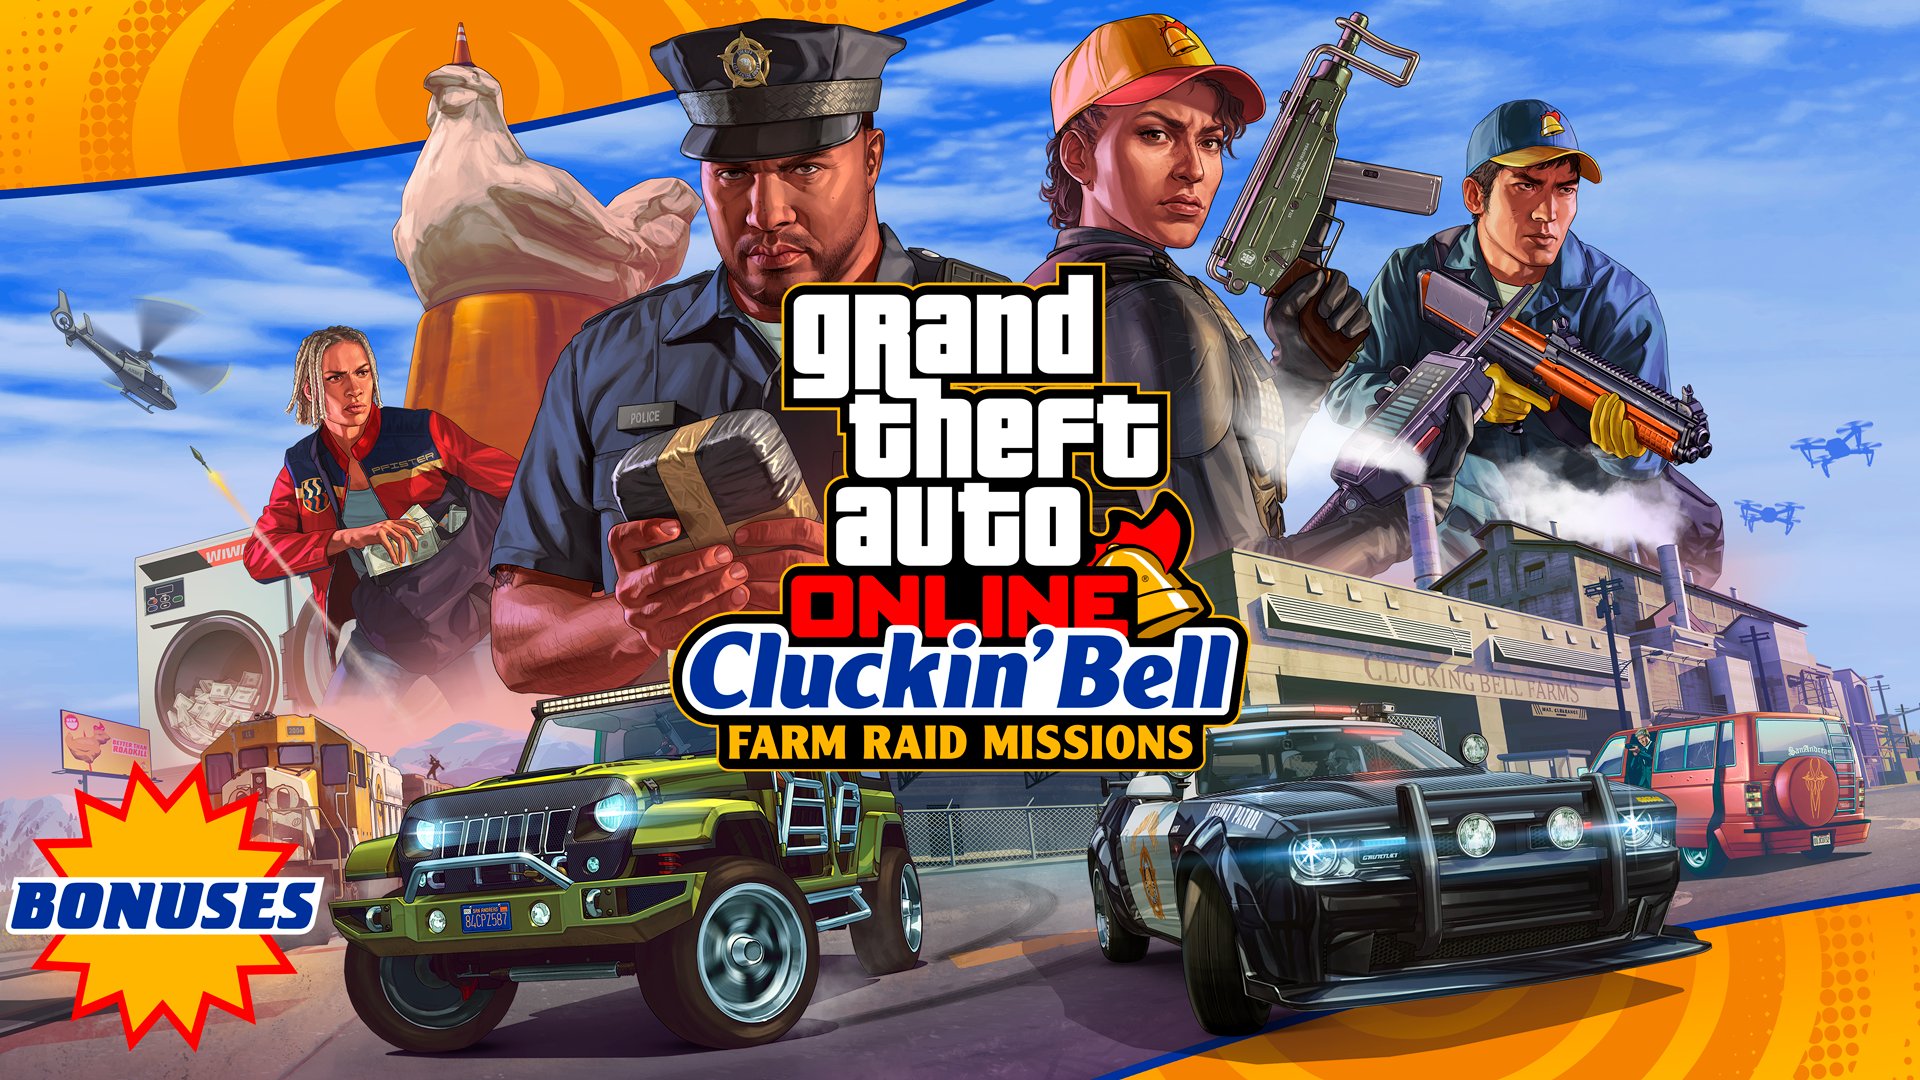 The Cluckin' Bell Farm Raid promotional poster in GTA Online's Weekly Event.